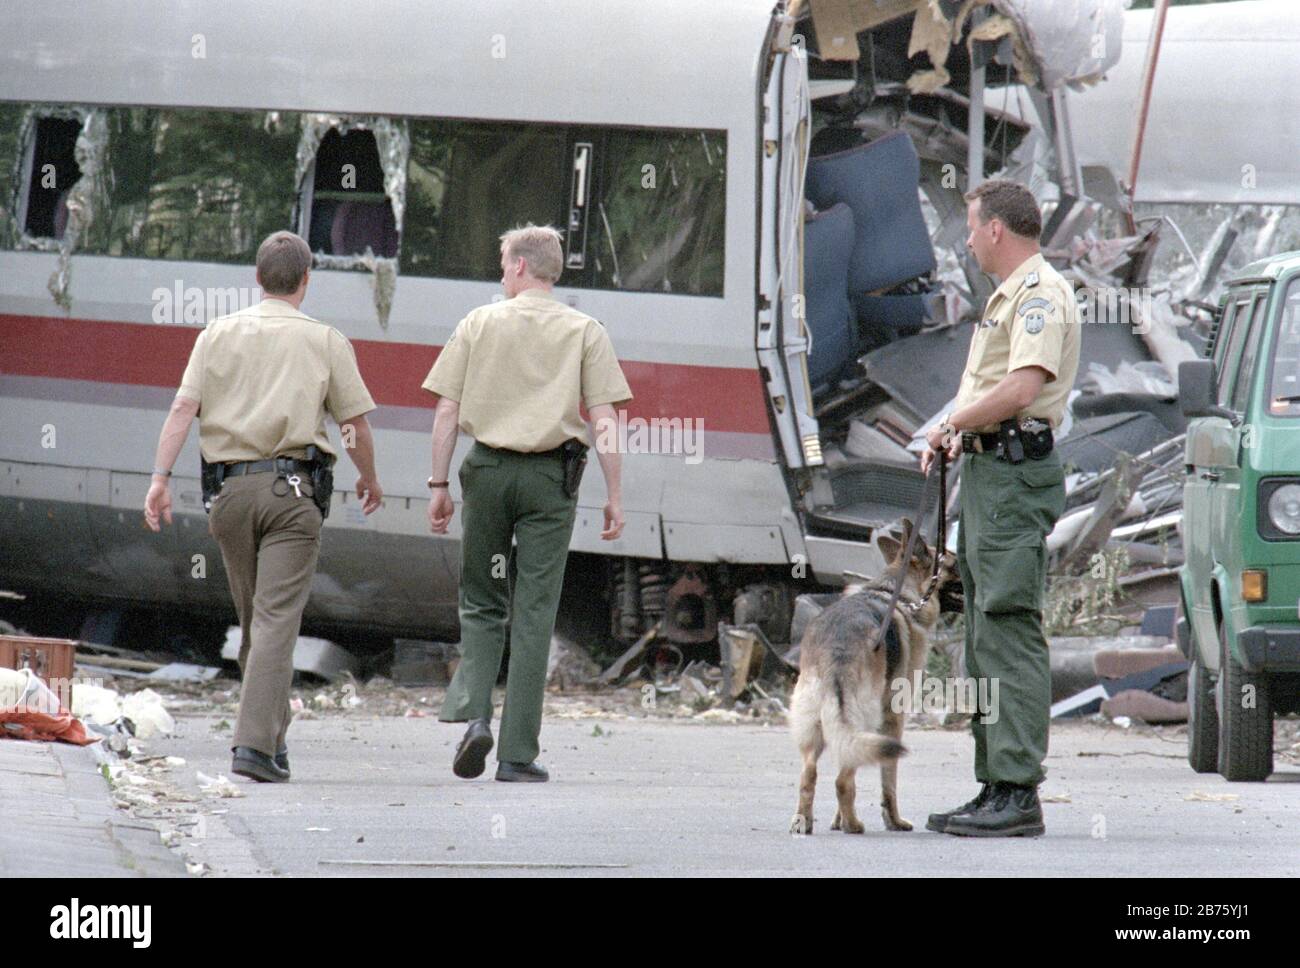 Policemen are standing next to a destroyed ICE wagon in Eschede on 06.06.1998. 102 people died in the sore spot of the Deutsche Bahn train accident. [automated translation] Stock Photo